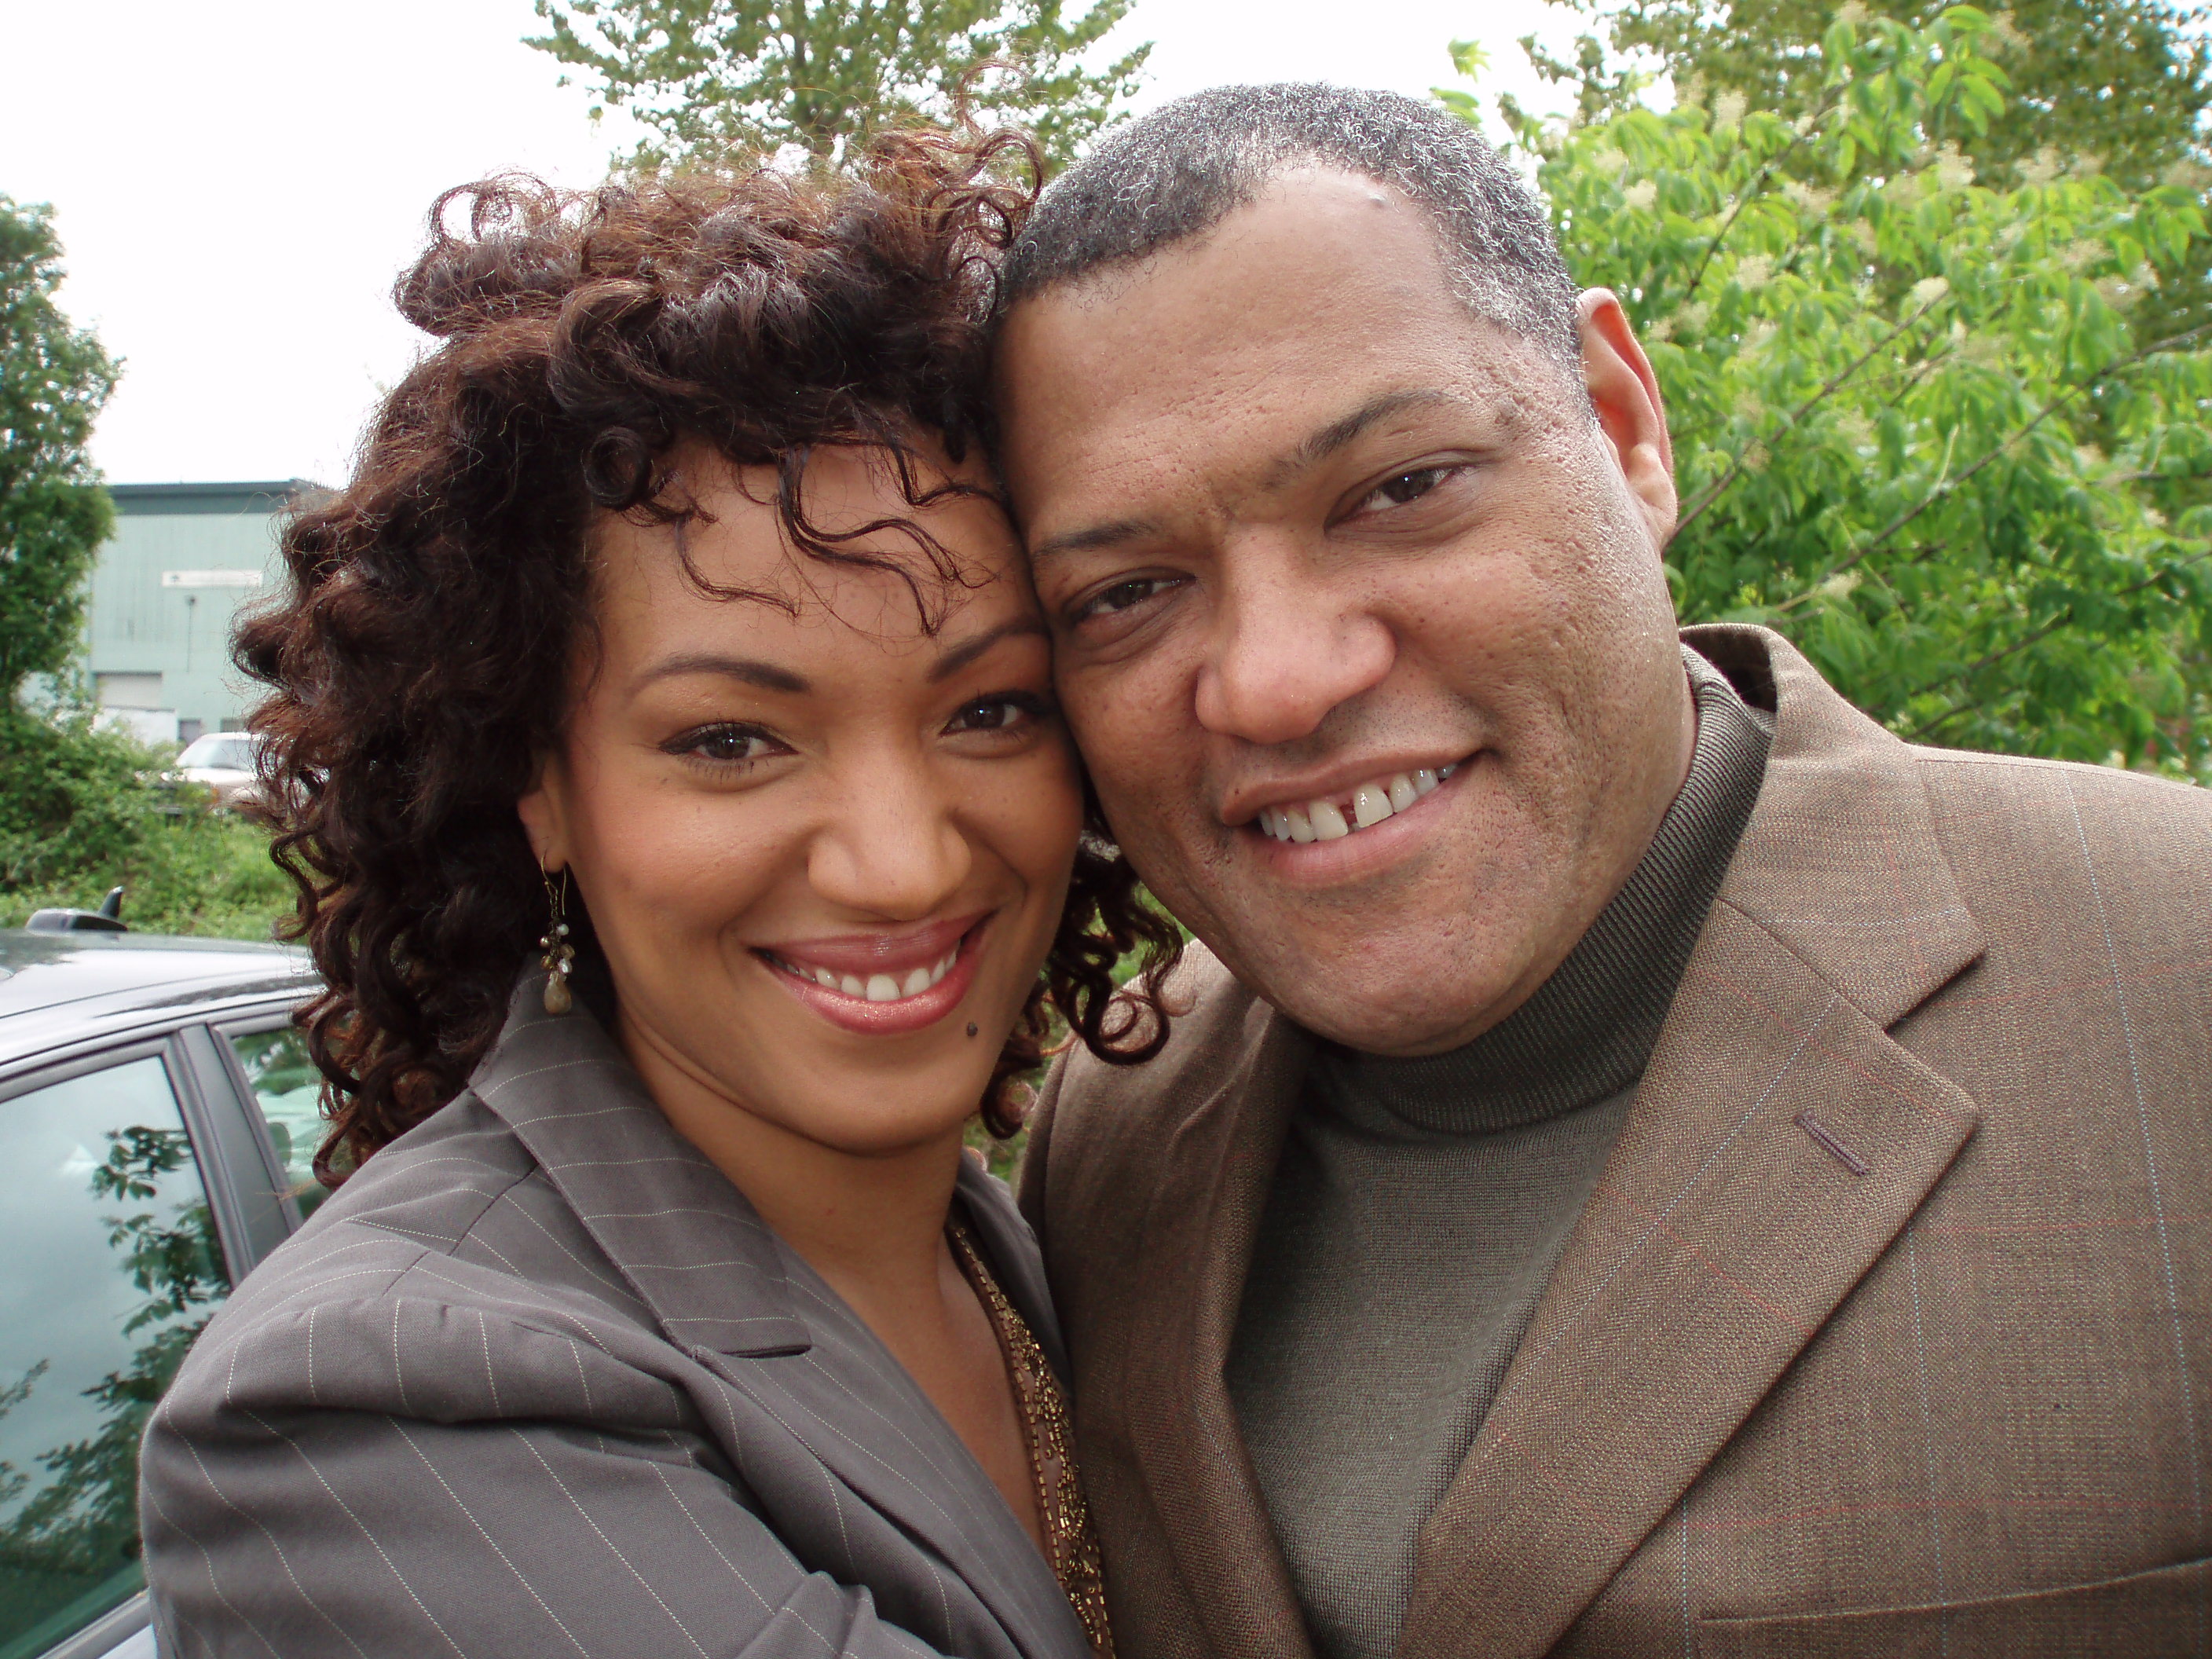 Karen Holness plays wife of Laurence Fishbourne in feature Film 